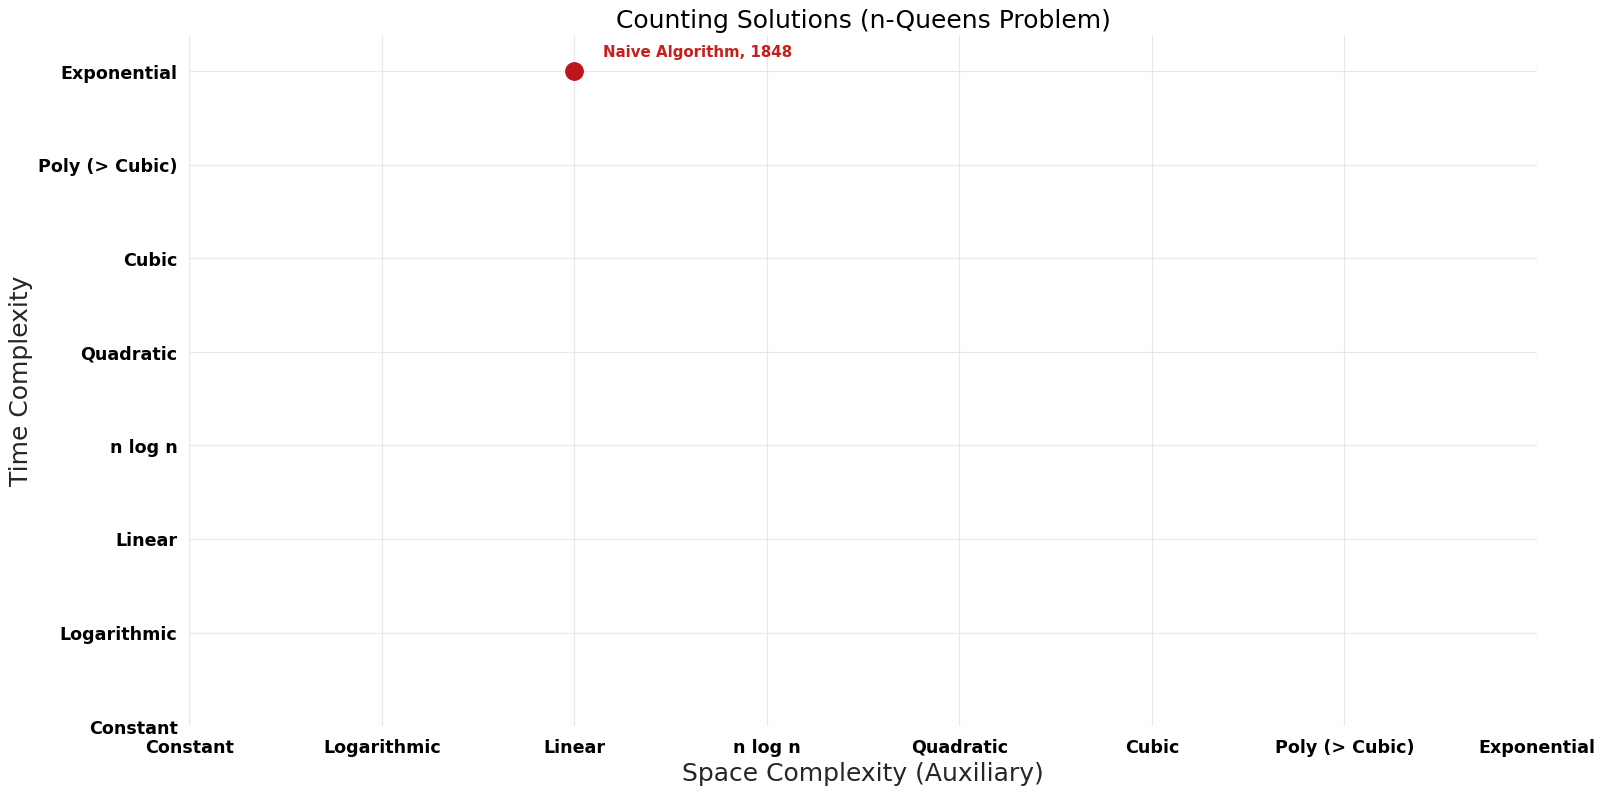 File:N-Queens Problem - Counting Solutions - Pareto Frontier.png